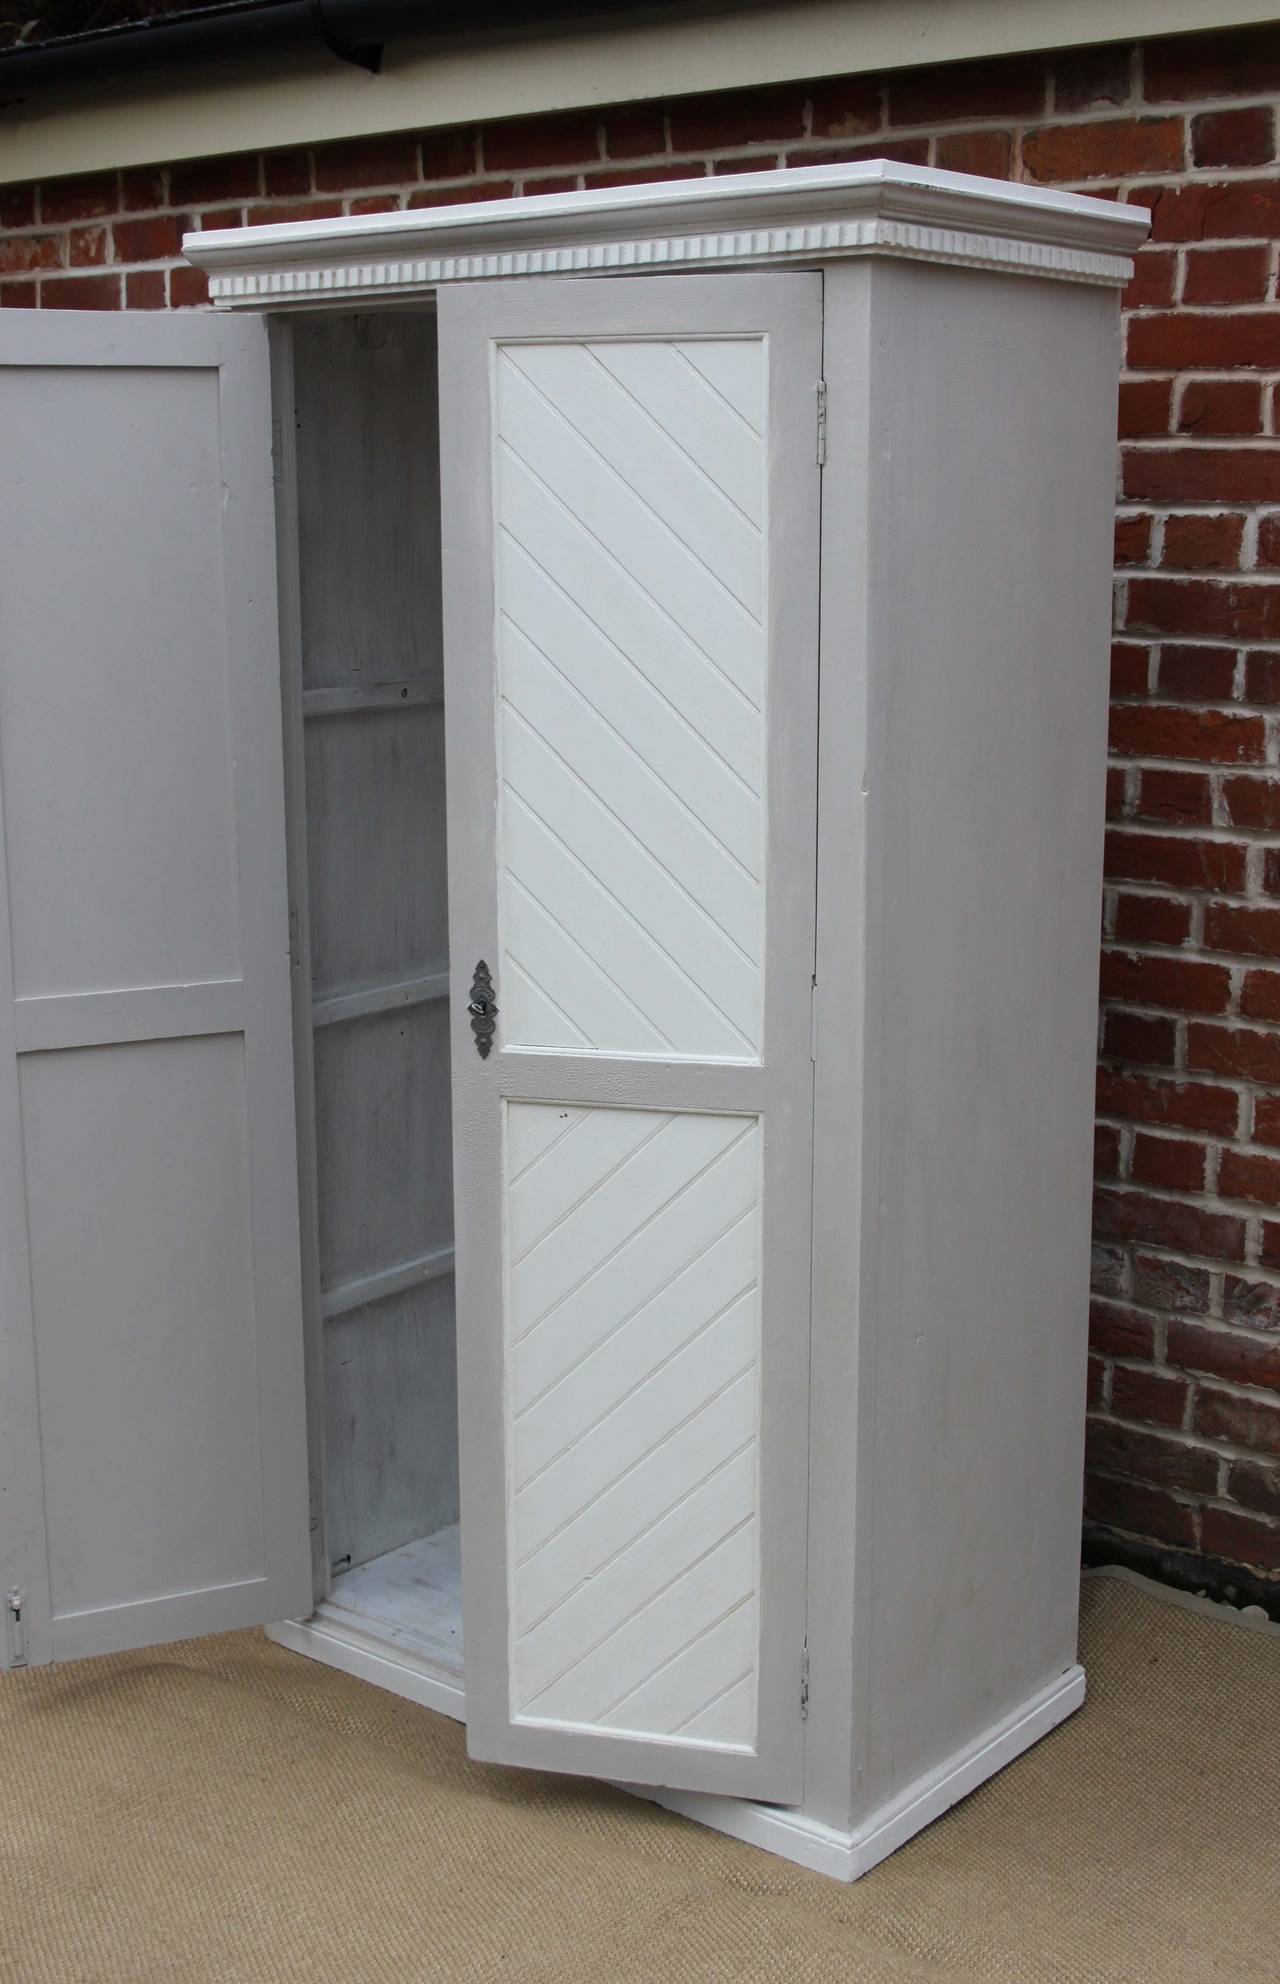 Painted Two-Door Wardrobe In Good Condition For Sale In Buckinghamshire, GB